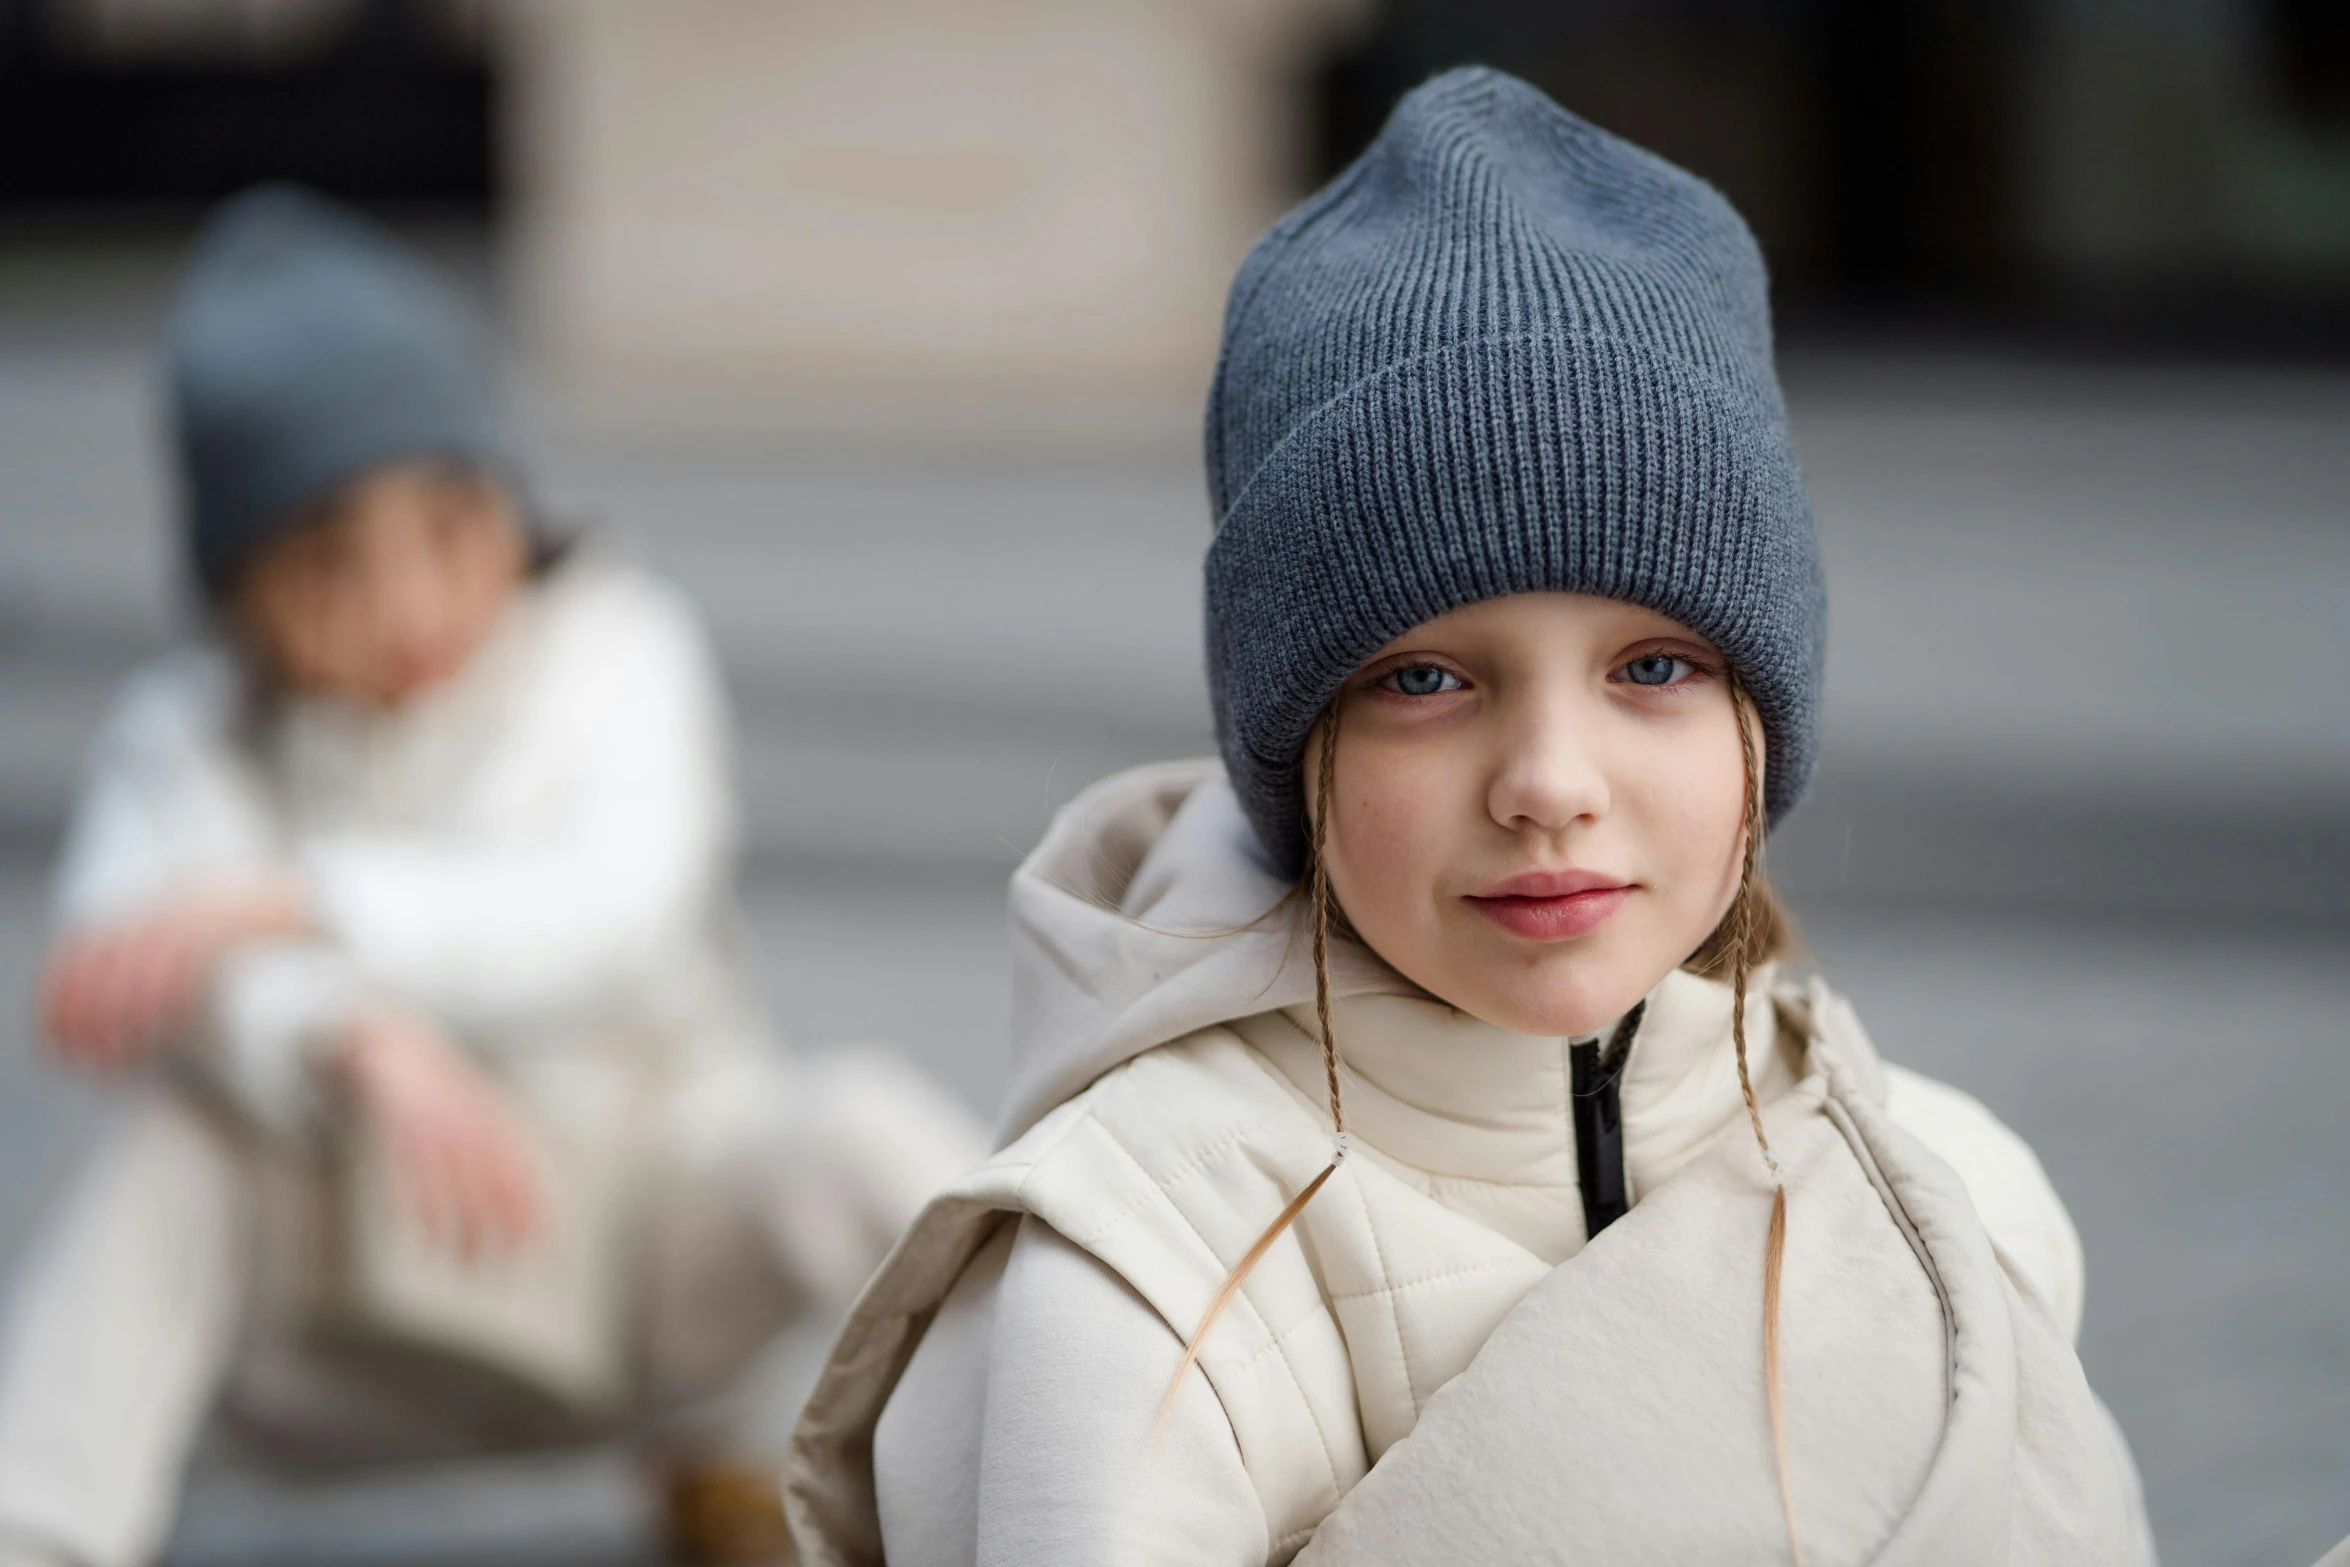 little girl is sitting down wearing a hat and jacket